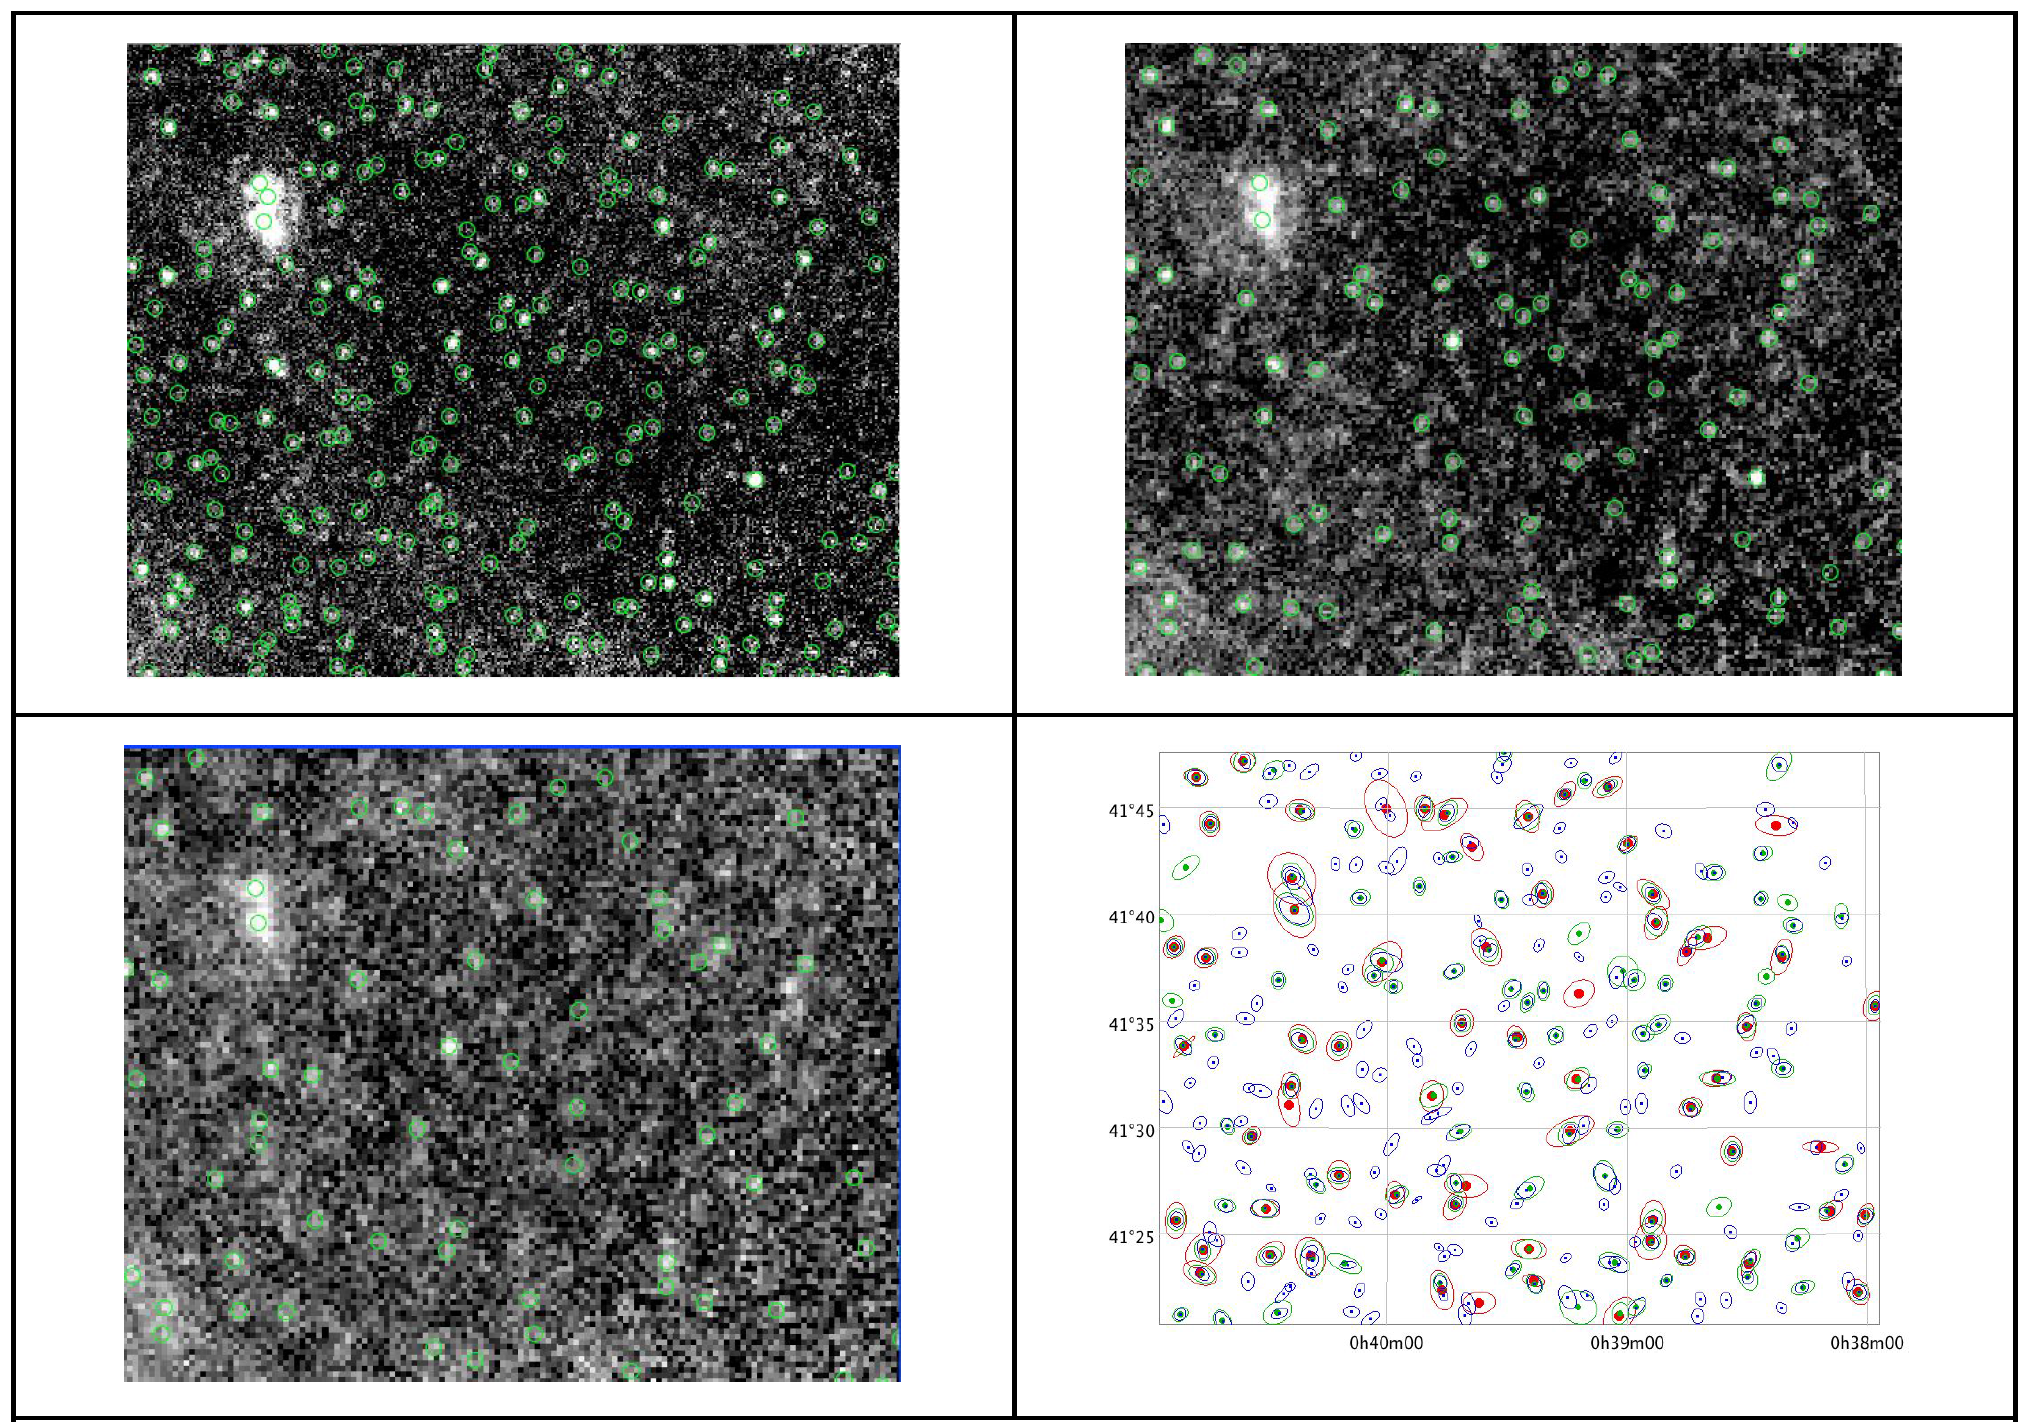 250μm (top left), 350μm (top right), and 500μm (bottom left) maps (ObsID: 1342211319) with overplotted object positions. The plot in the lower right corner shows the ellipses derived from the shape parameters, with different wavelengths represented in blue (250μm), green (350μm) and red (500μm) colours.